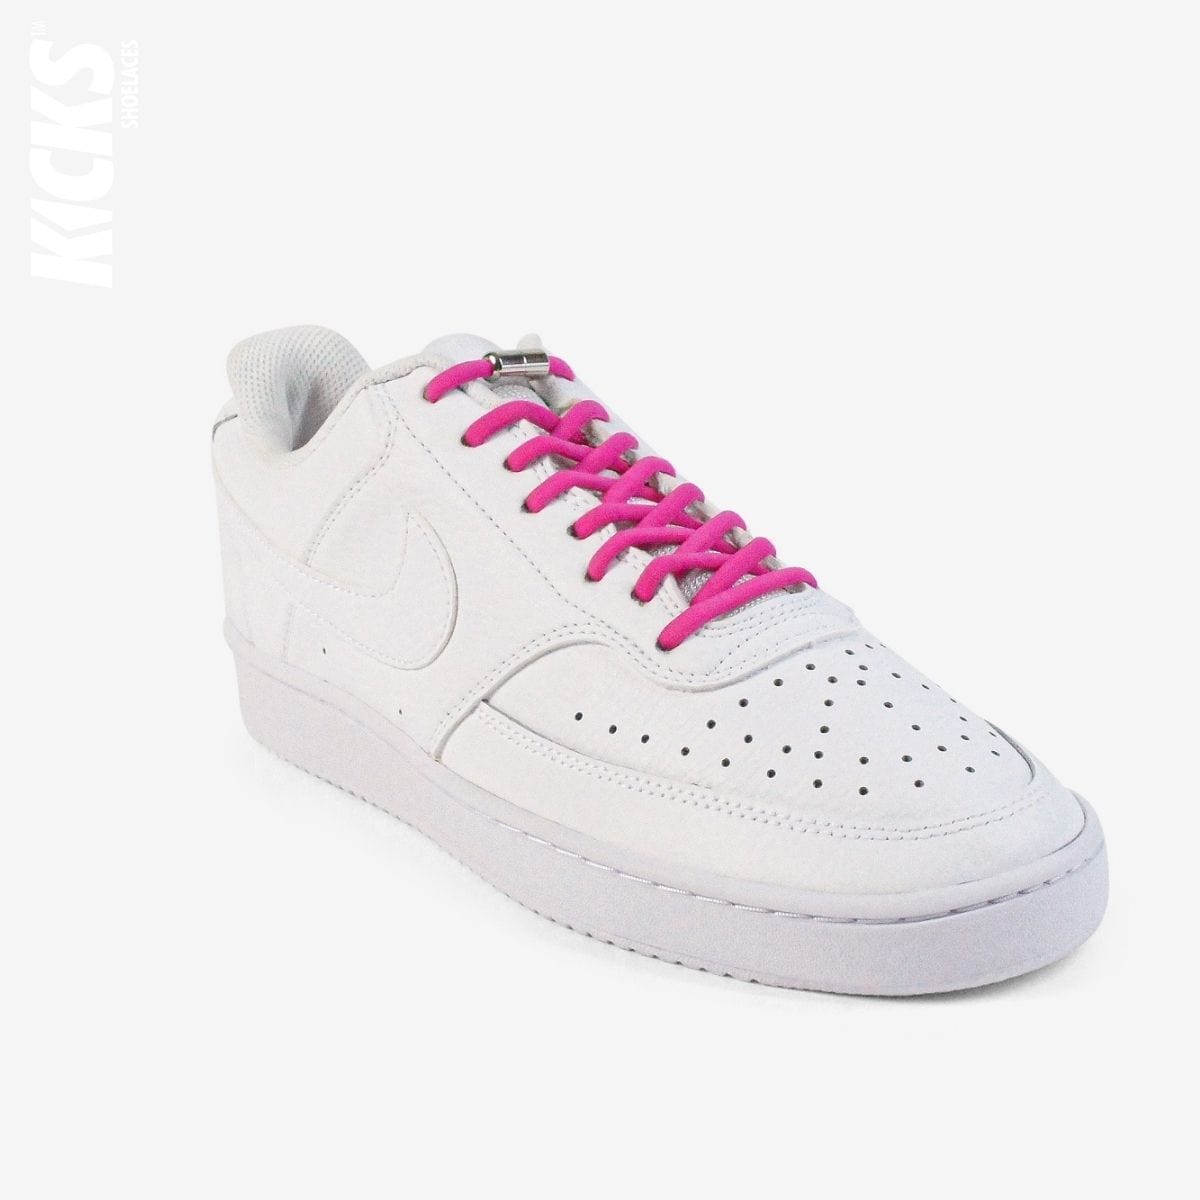 round-no-tie-shoelaces-with-rose-pink-laces-on-nike-white-sneakers-by-kicks-shoelaces